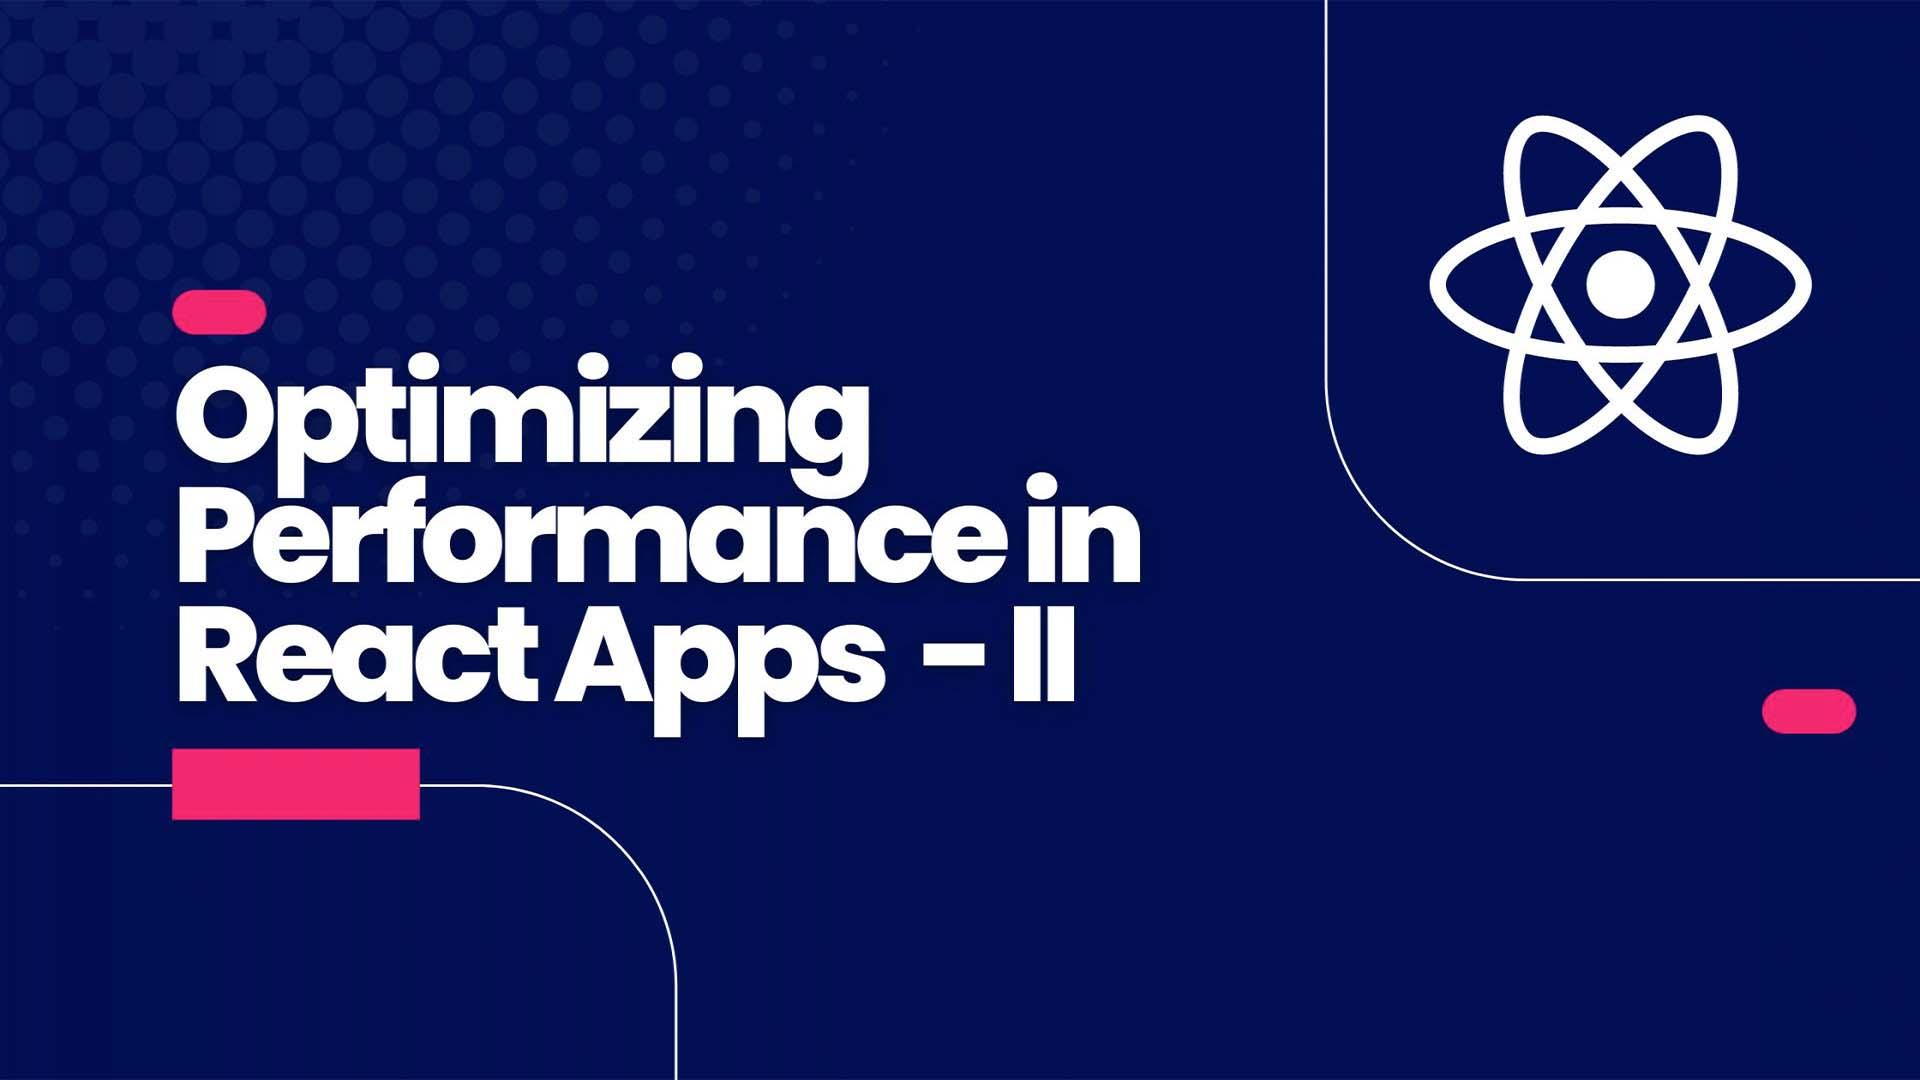 Optimizing Performance in React Apps - II